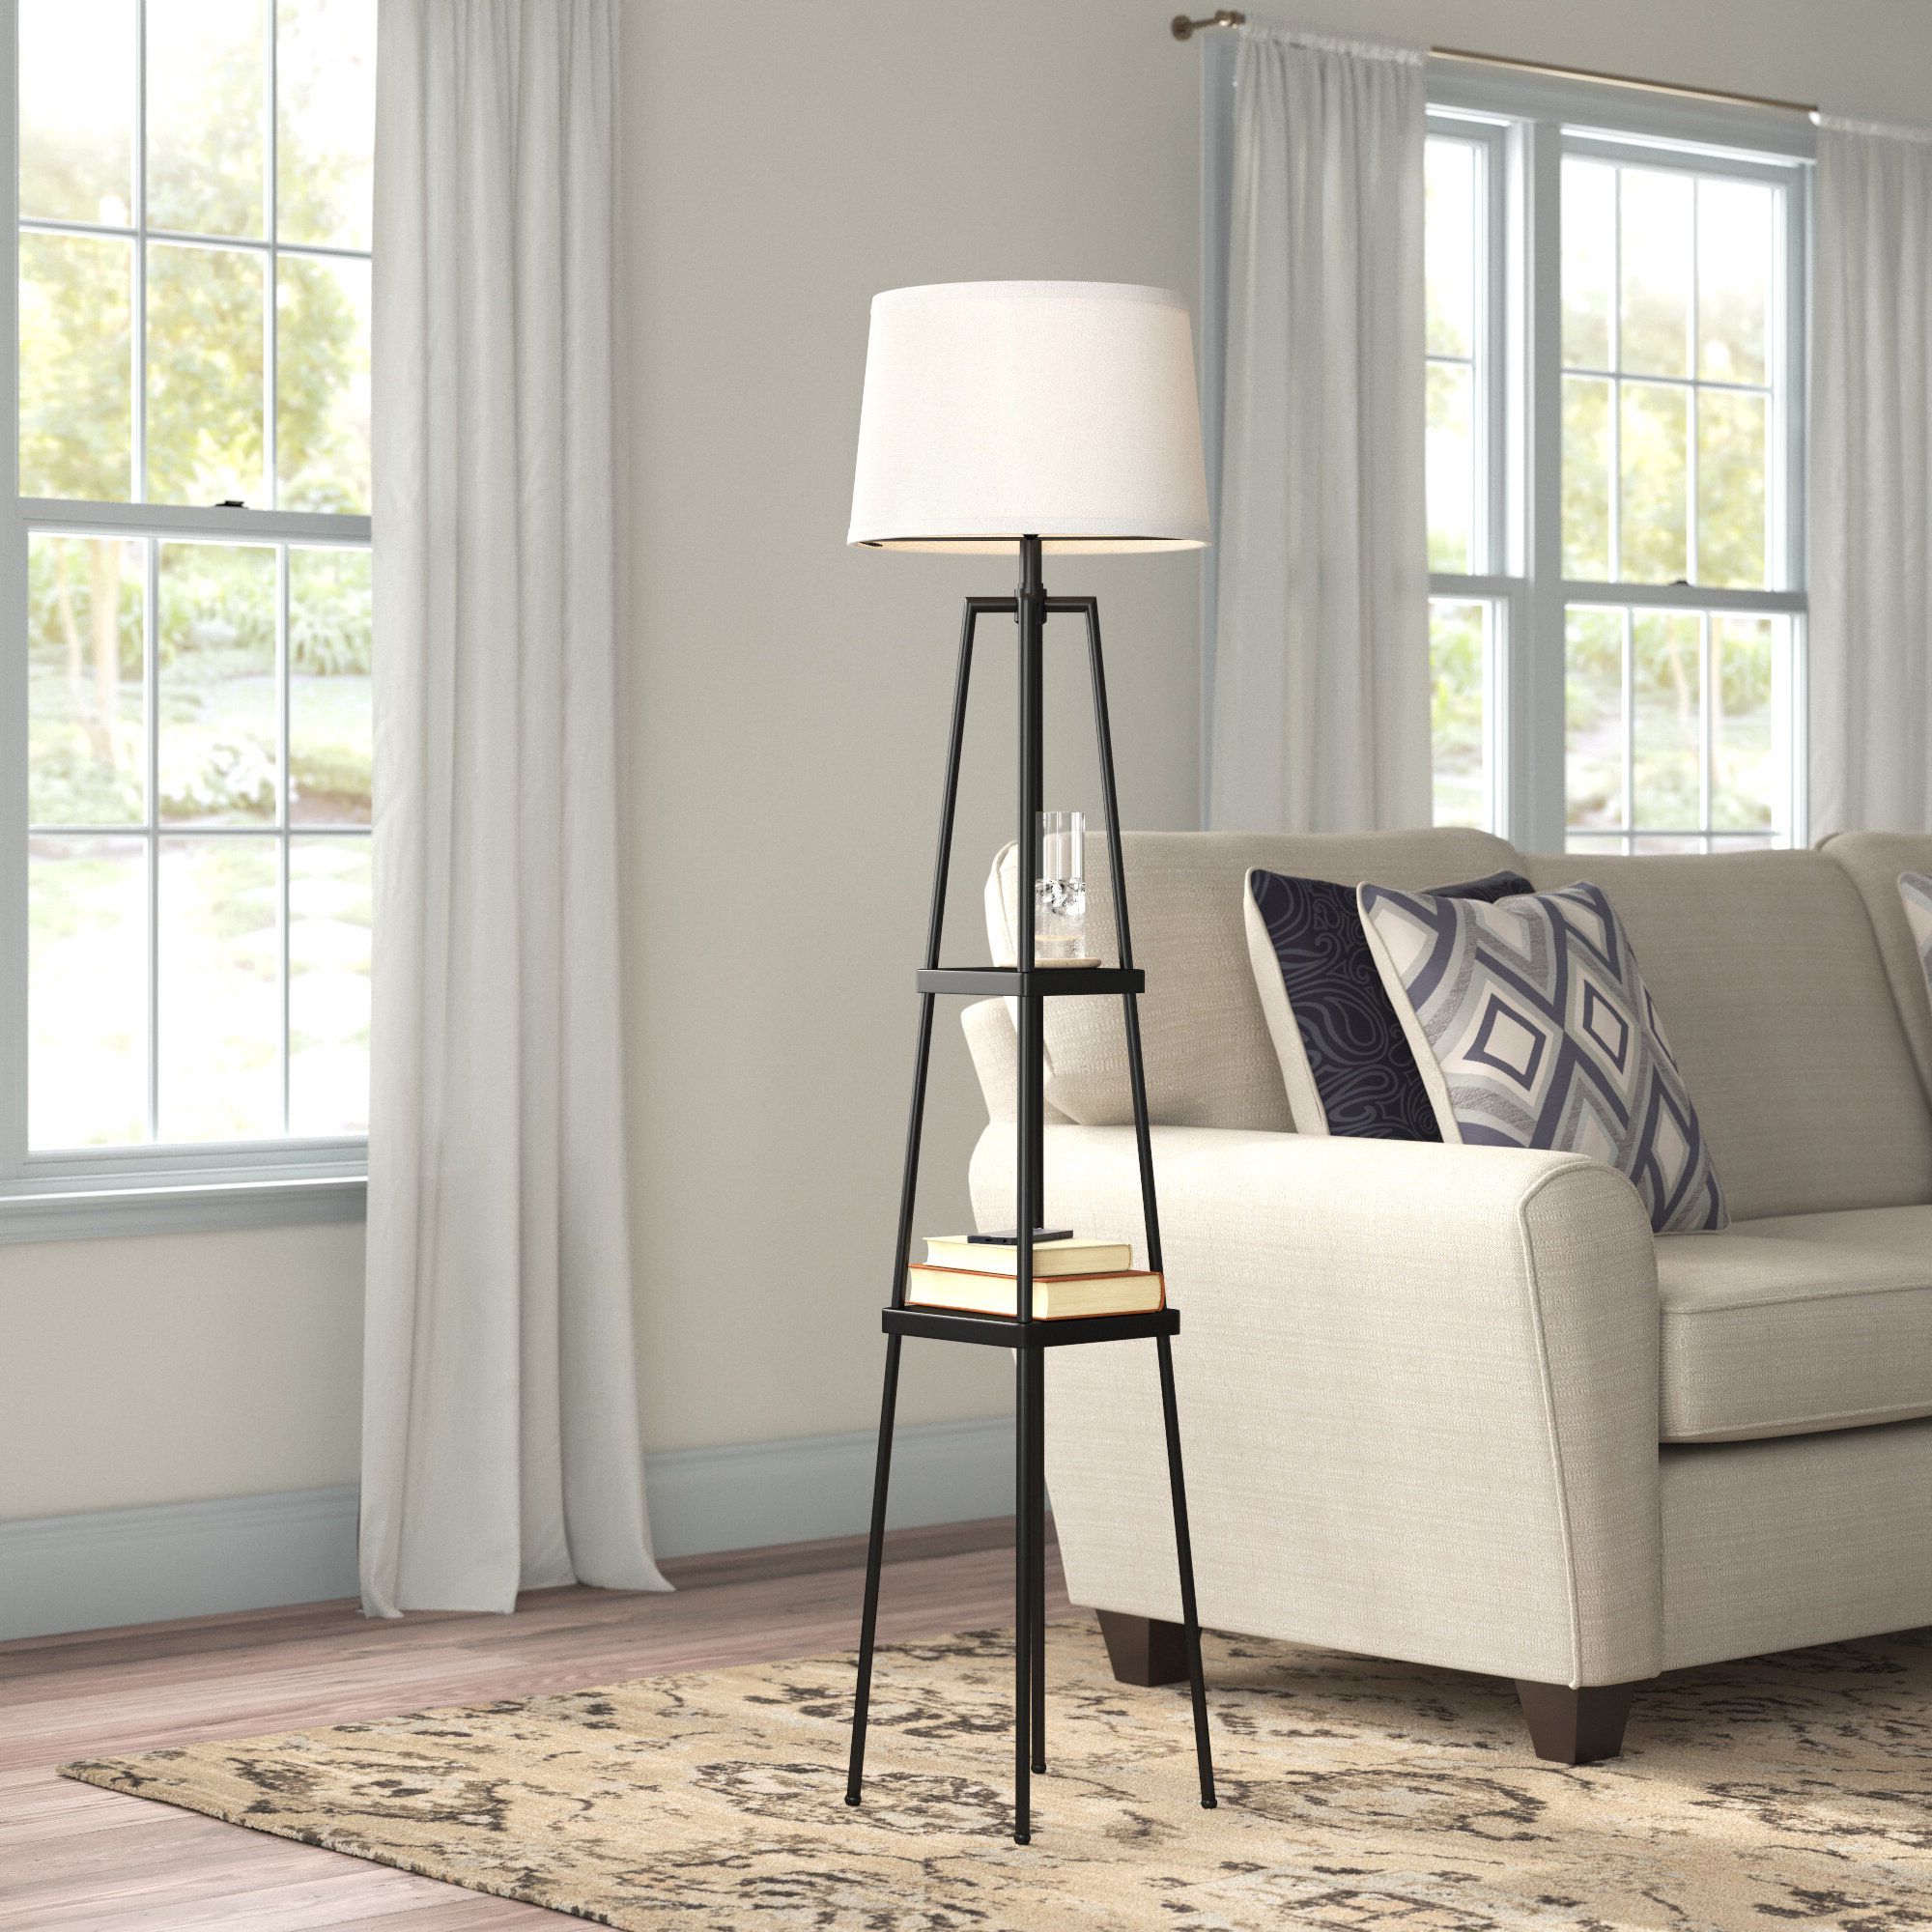 Latitude Run® 58" Modern Metal Etagere Floor Lamp With Shelves And Linen  Shade & Reviews (View 2 of 10)